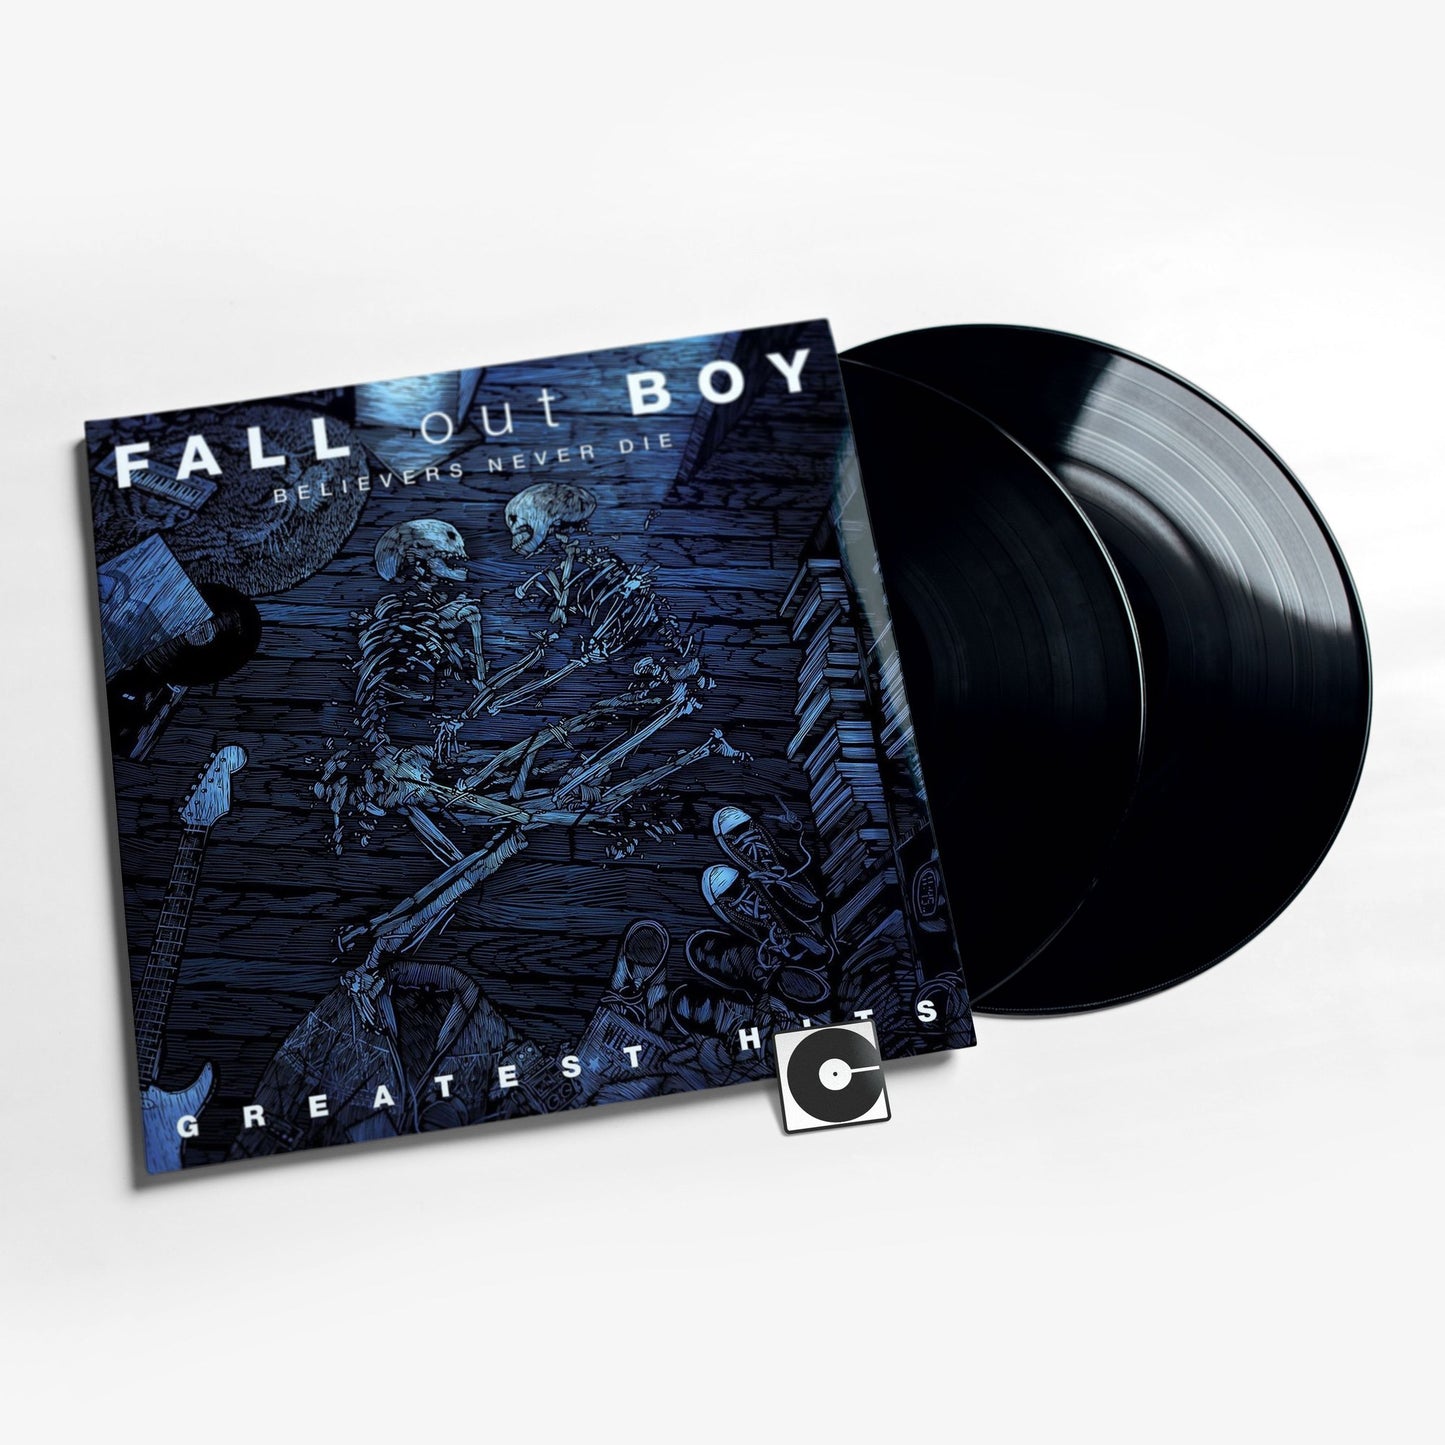 Fall Out Boy - "Believers Never Die: Greatest Hits"